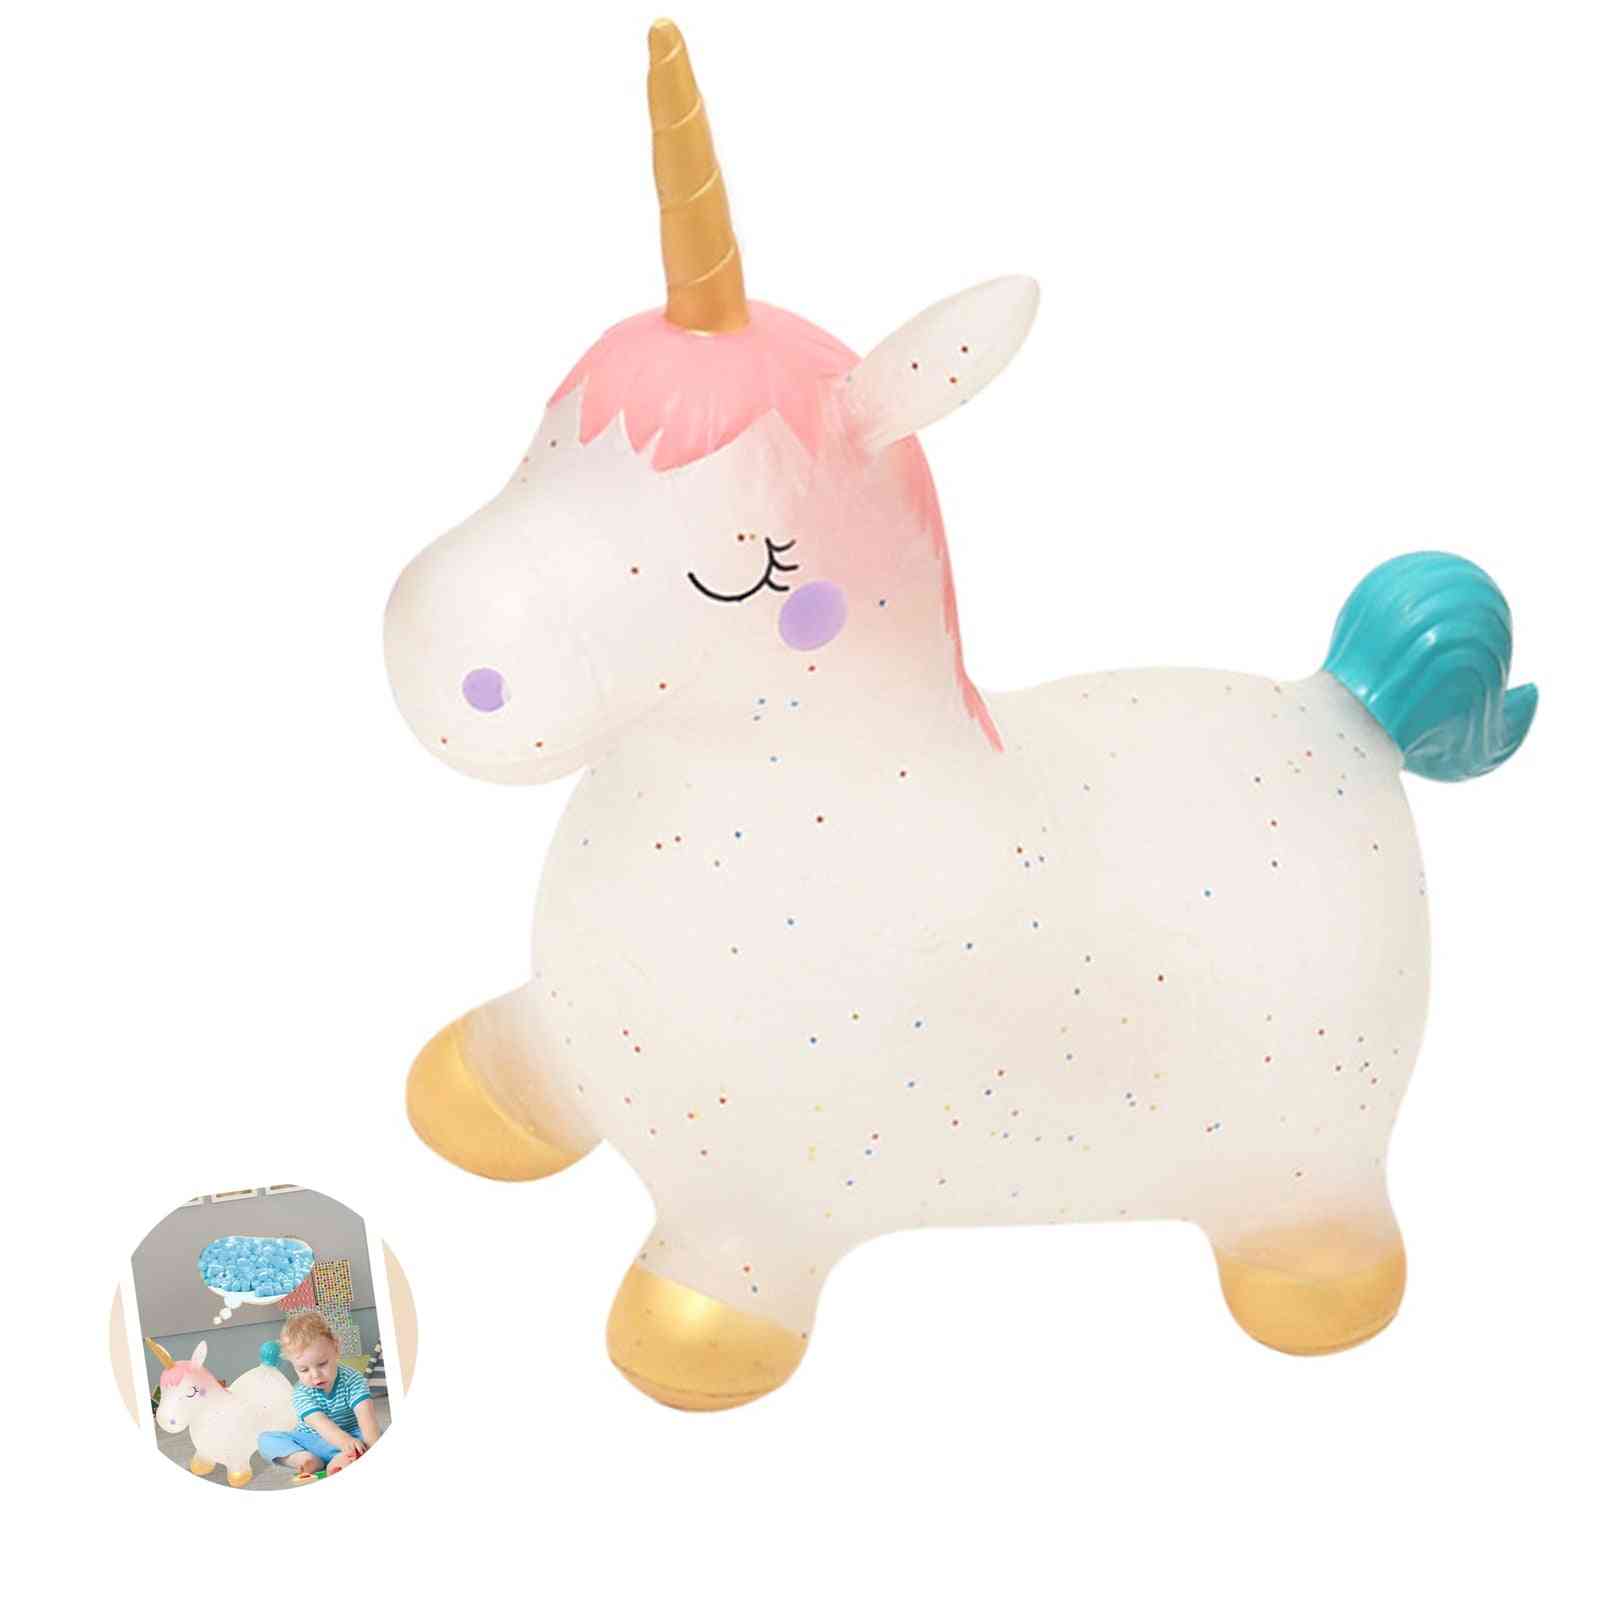 Cute Baby Inflatable Lovely Unicorn With Outdoor Sports Games Toy